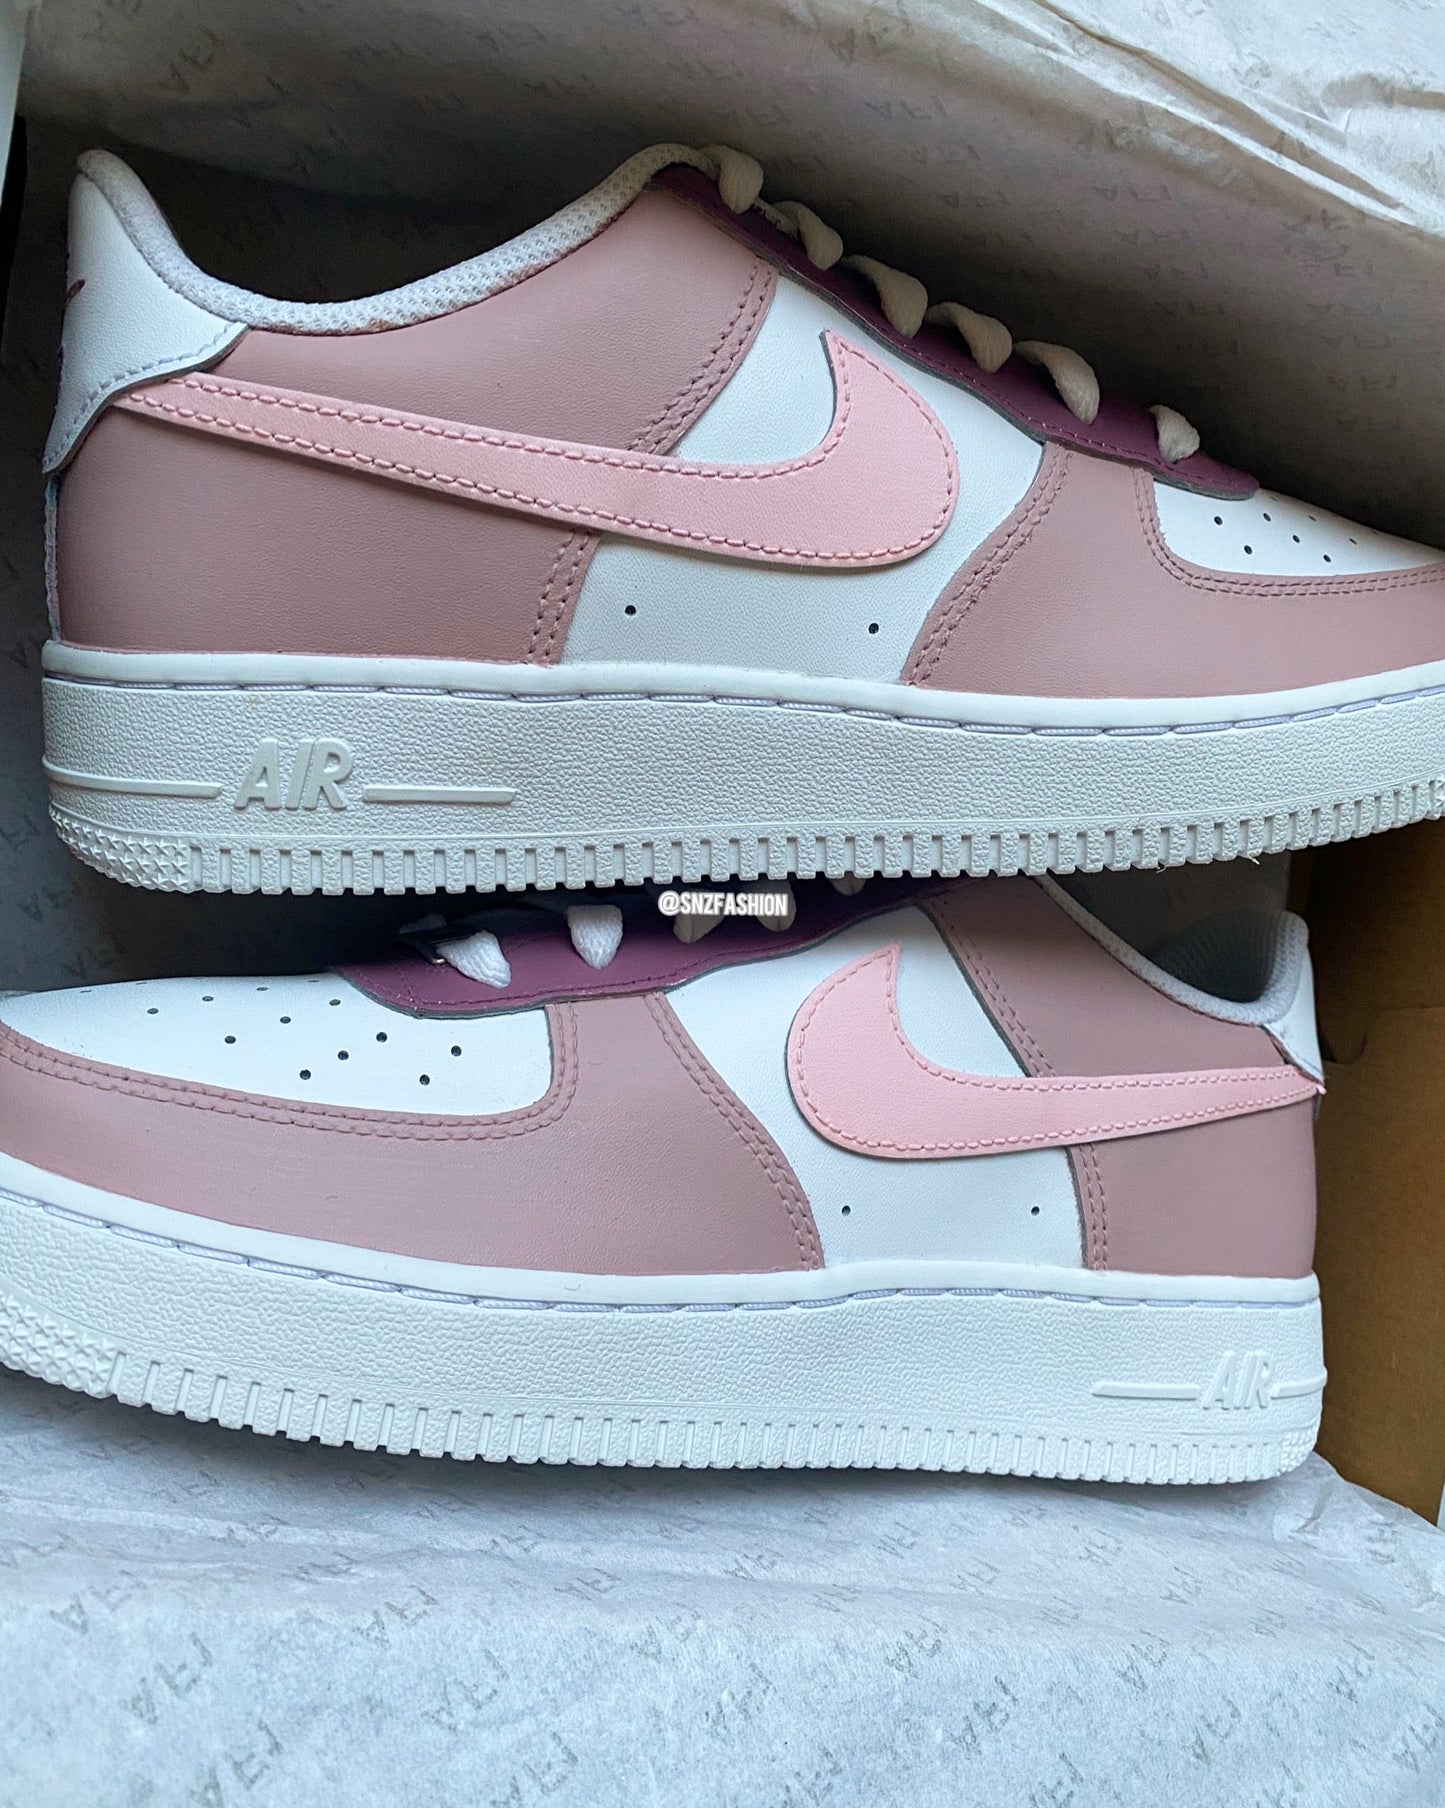 PINK BLOSSOM NIKE AIR FORCE 1'S (BABY/KIDS)